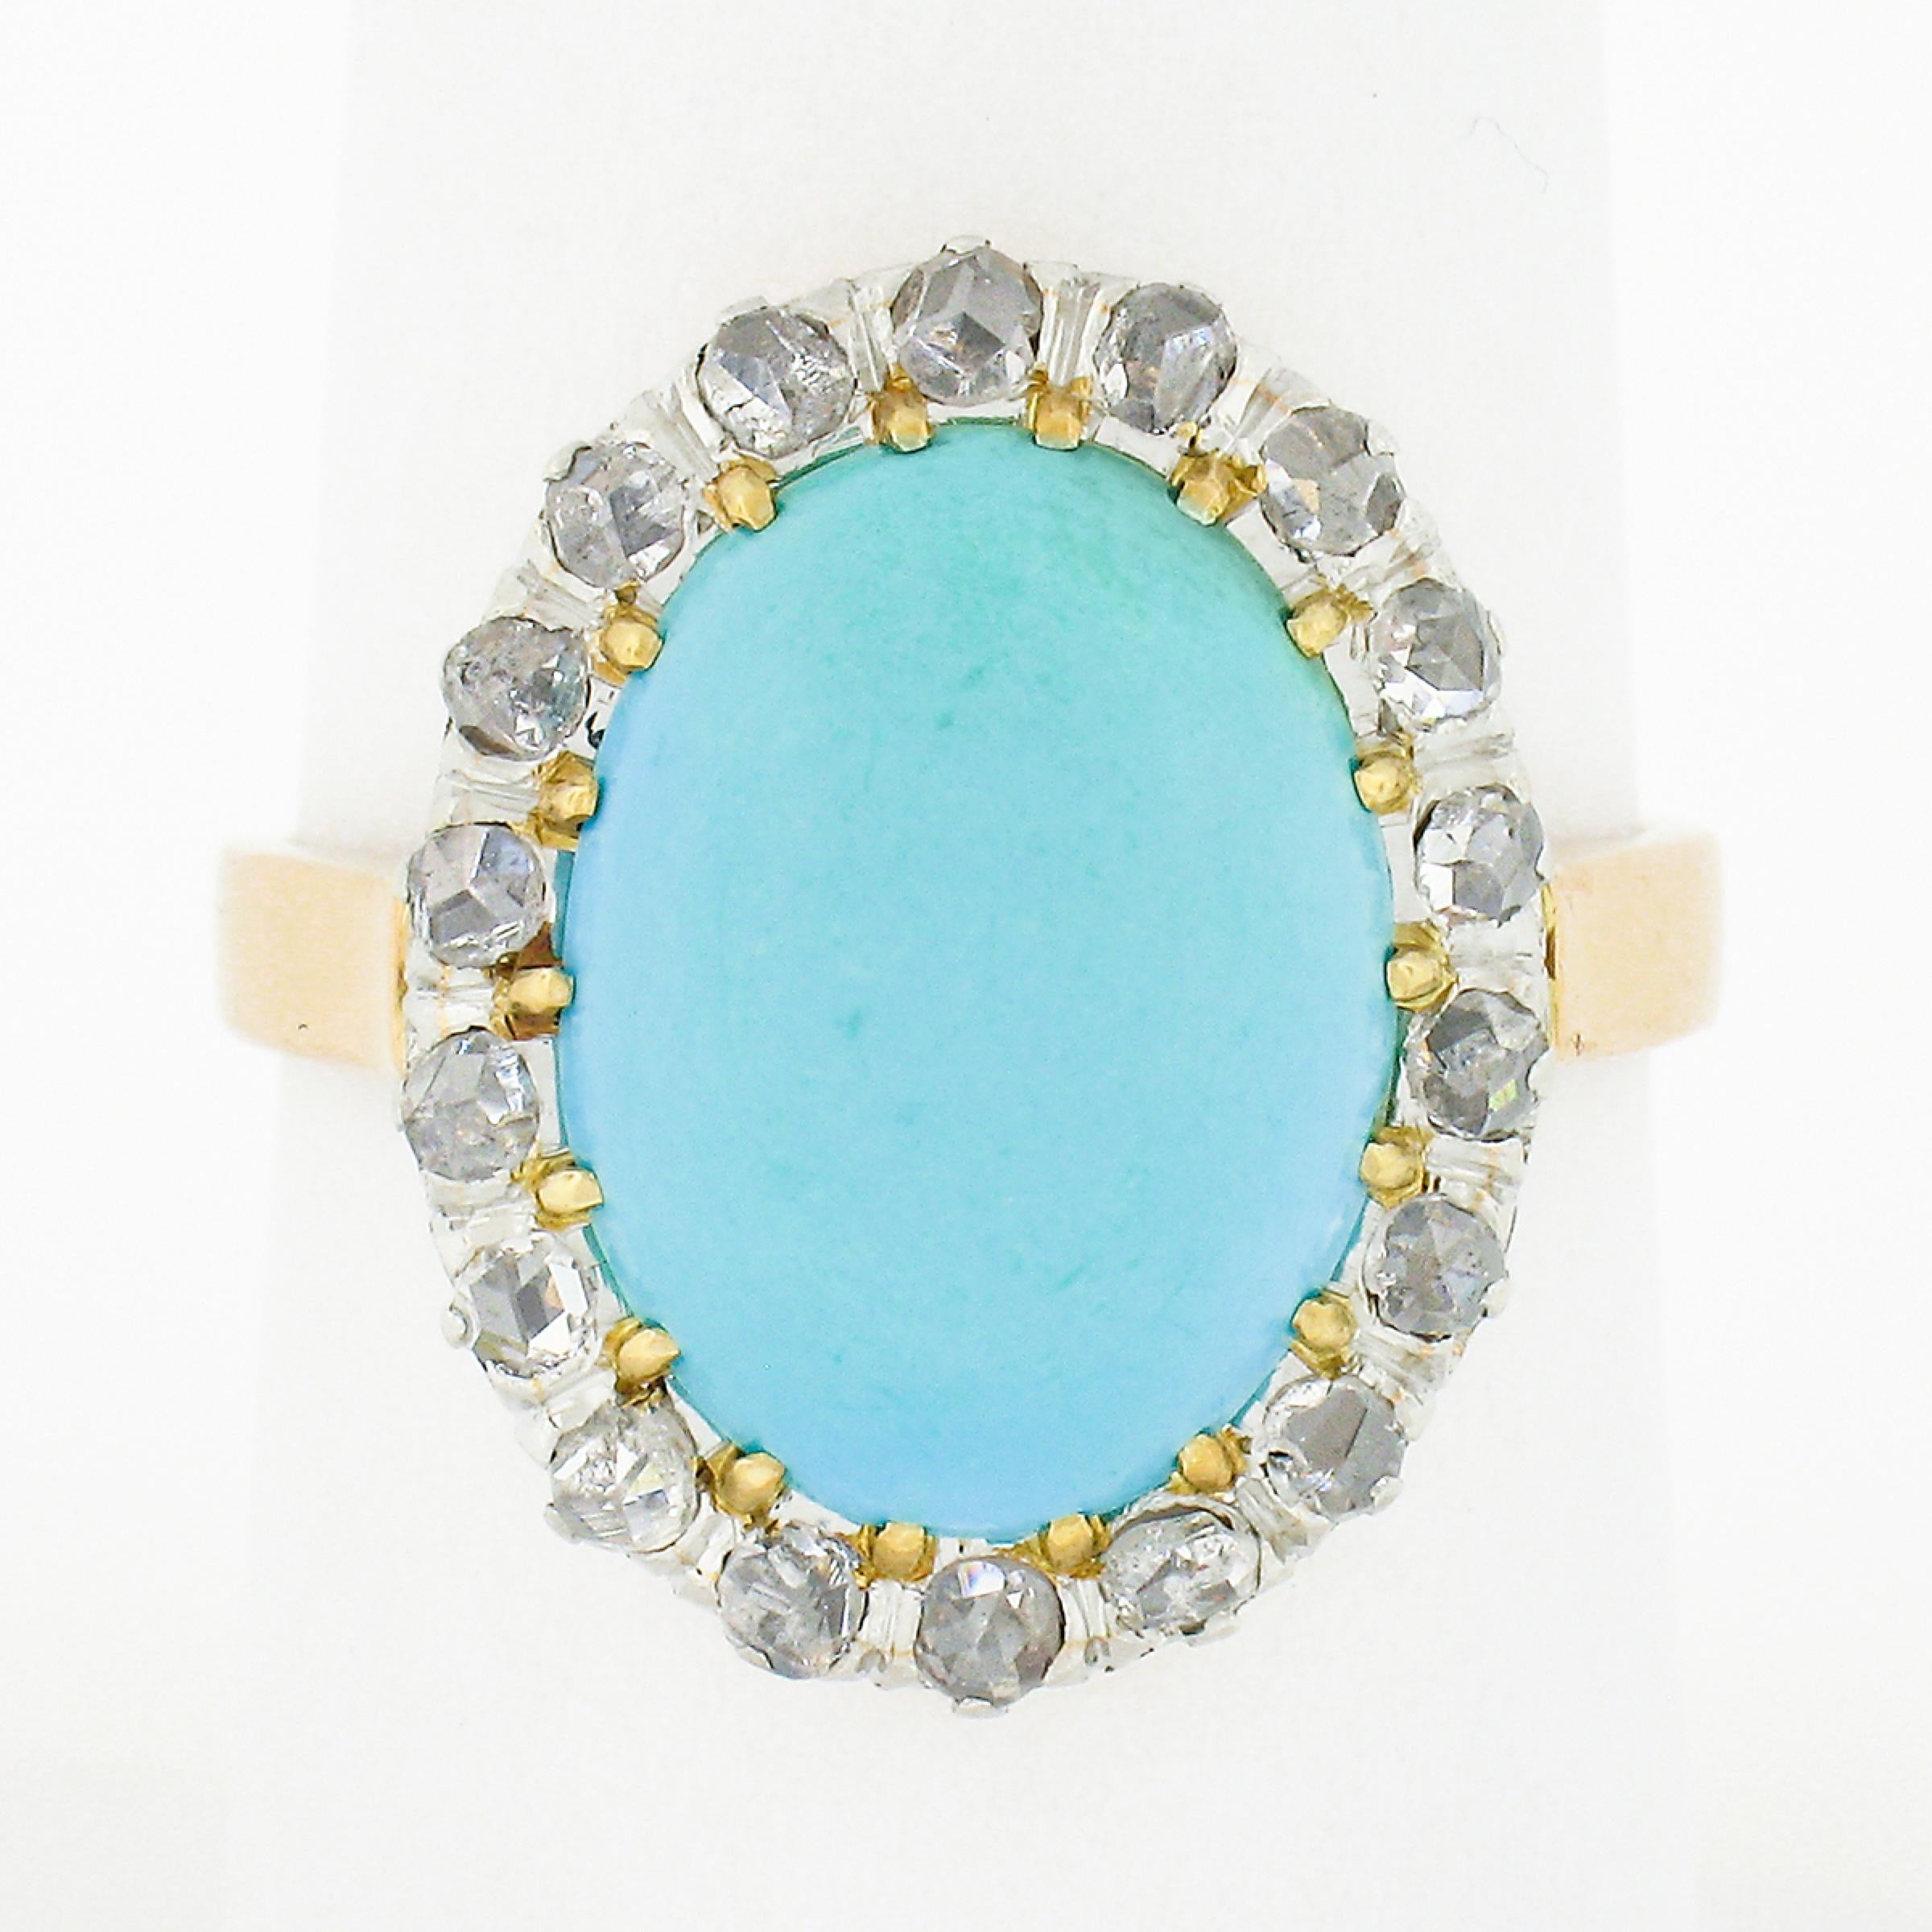 Here we have a very lovely antique turquoise and diamond ring that was crafted in solid 18k gold with a platinum top during the Victorian era. It features a fine, Persian, oval cabochon cut turquoise stone neatly set at its center. The natural stone